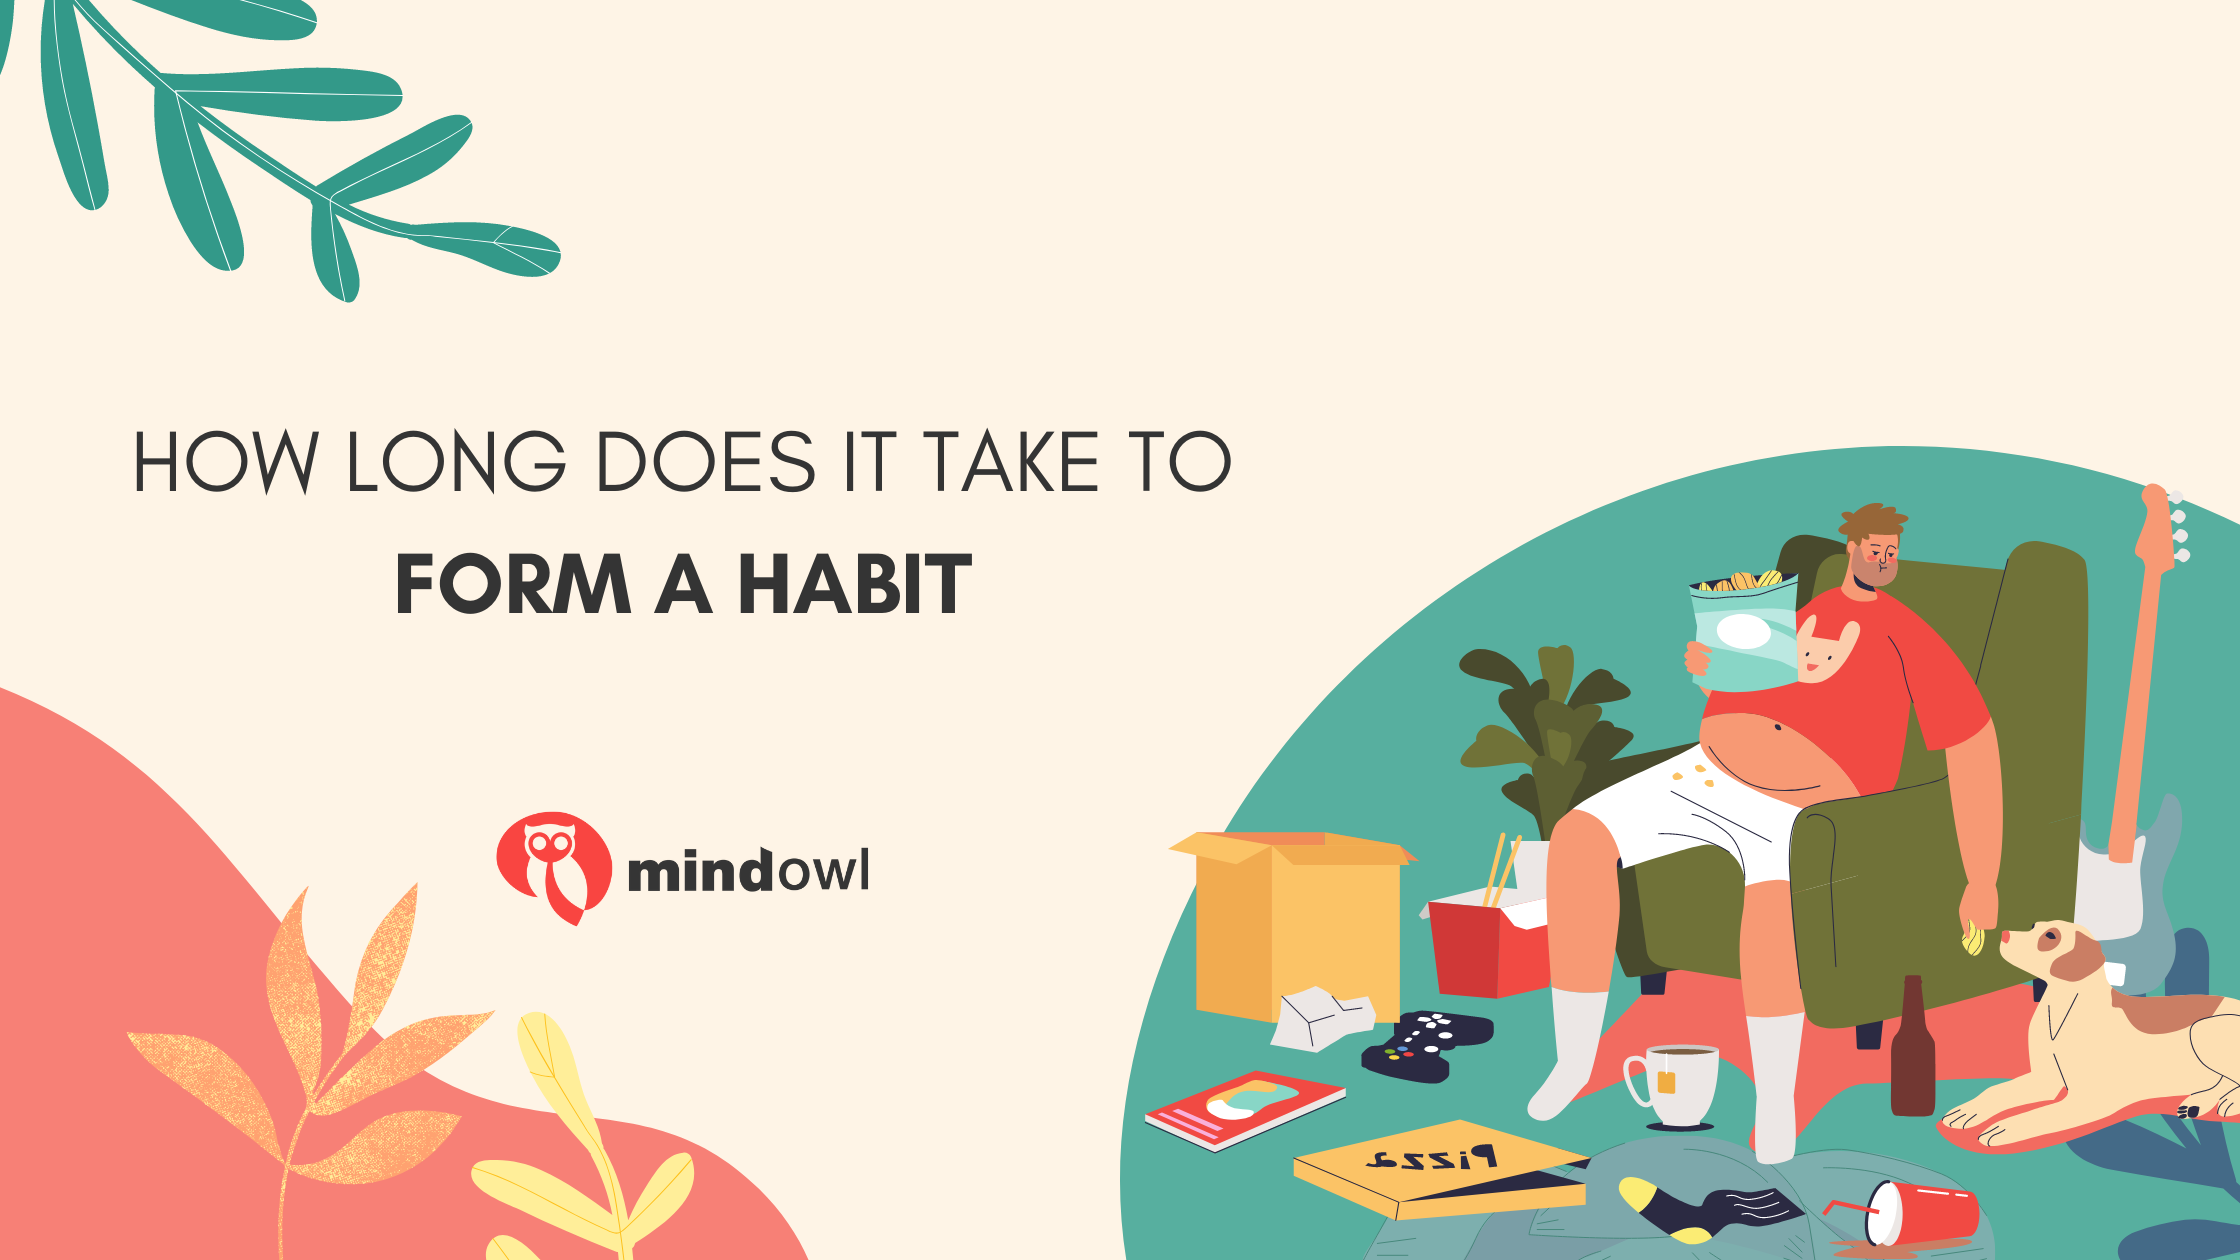 How long does it take to form a habit